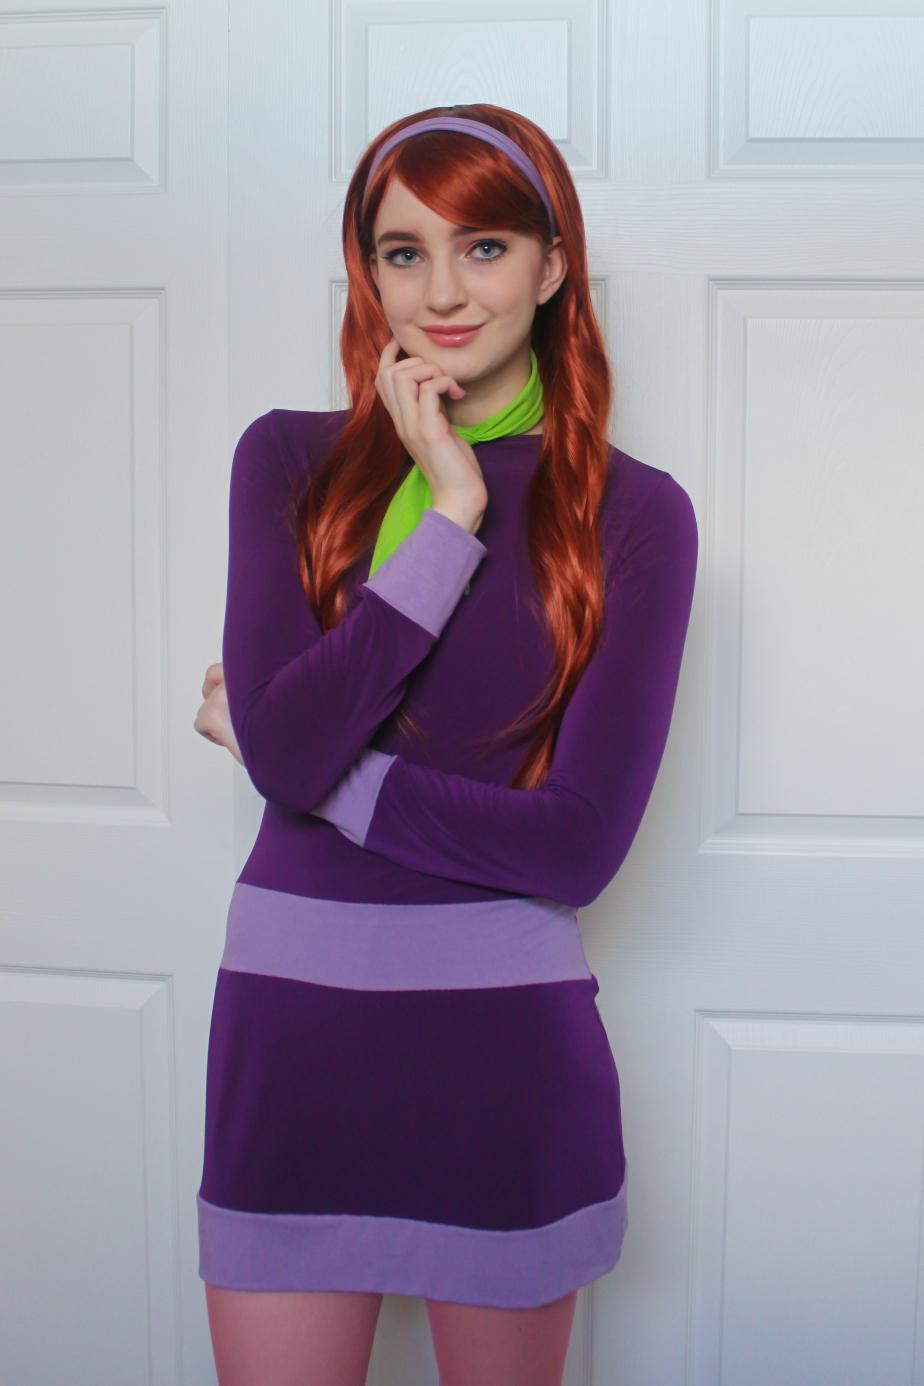 70+ Hot Pictures Of Daphne Blake From Scooby Doo Which Are Sure to Catch Your Attention 23